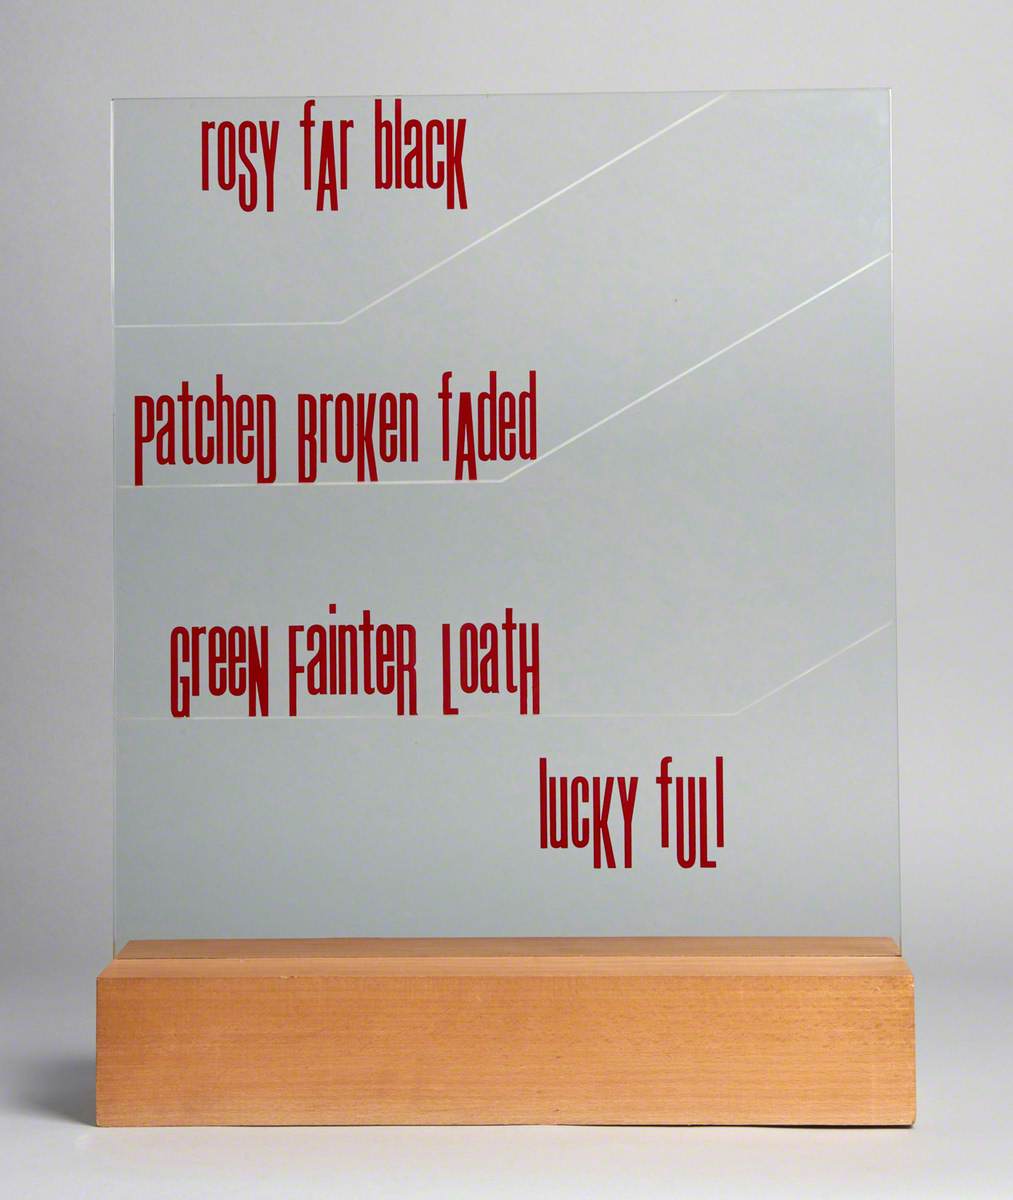 Four Sails (Rosy far Black; Patched Broken Faded; Green Fainter Loath; Lucky Full) (1977)